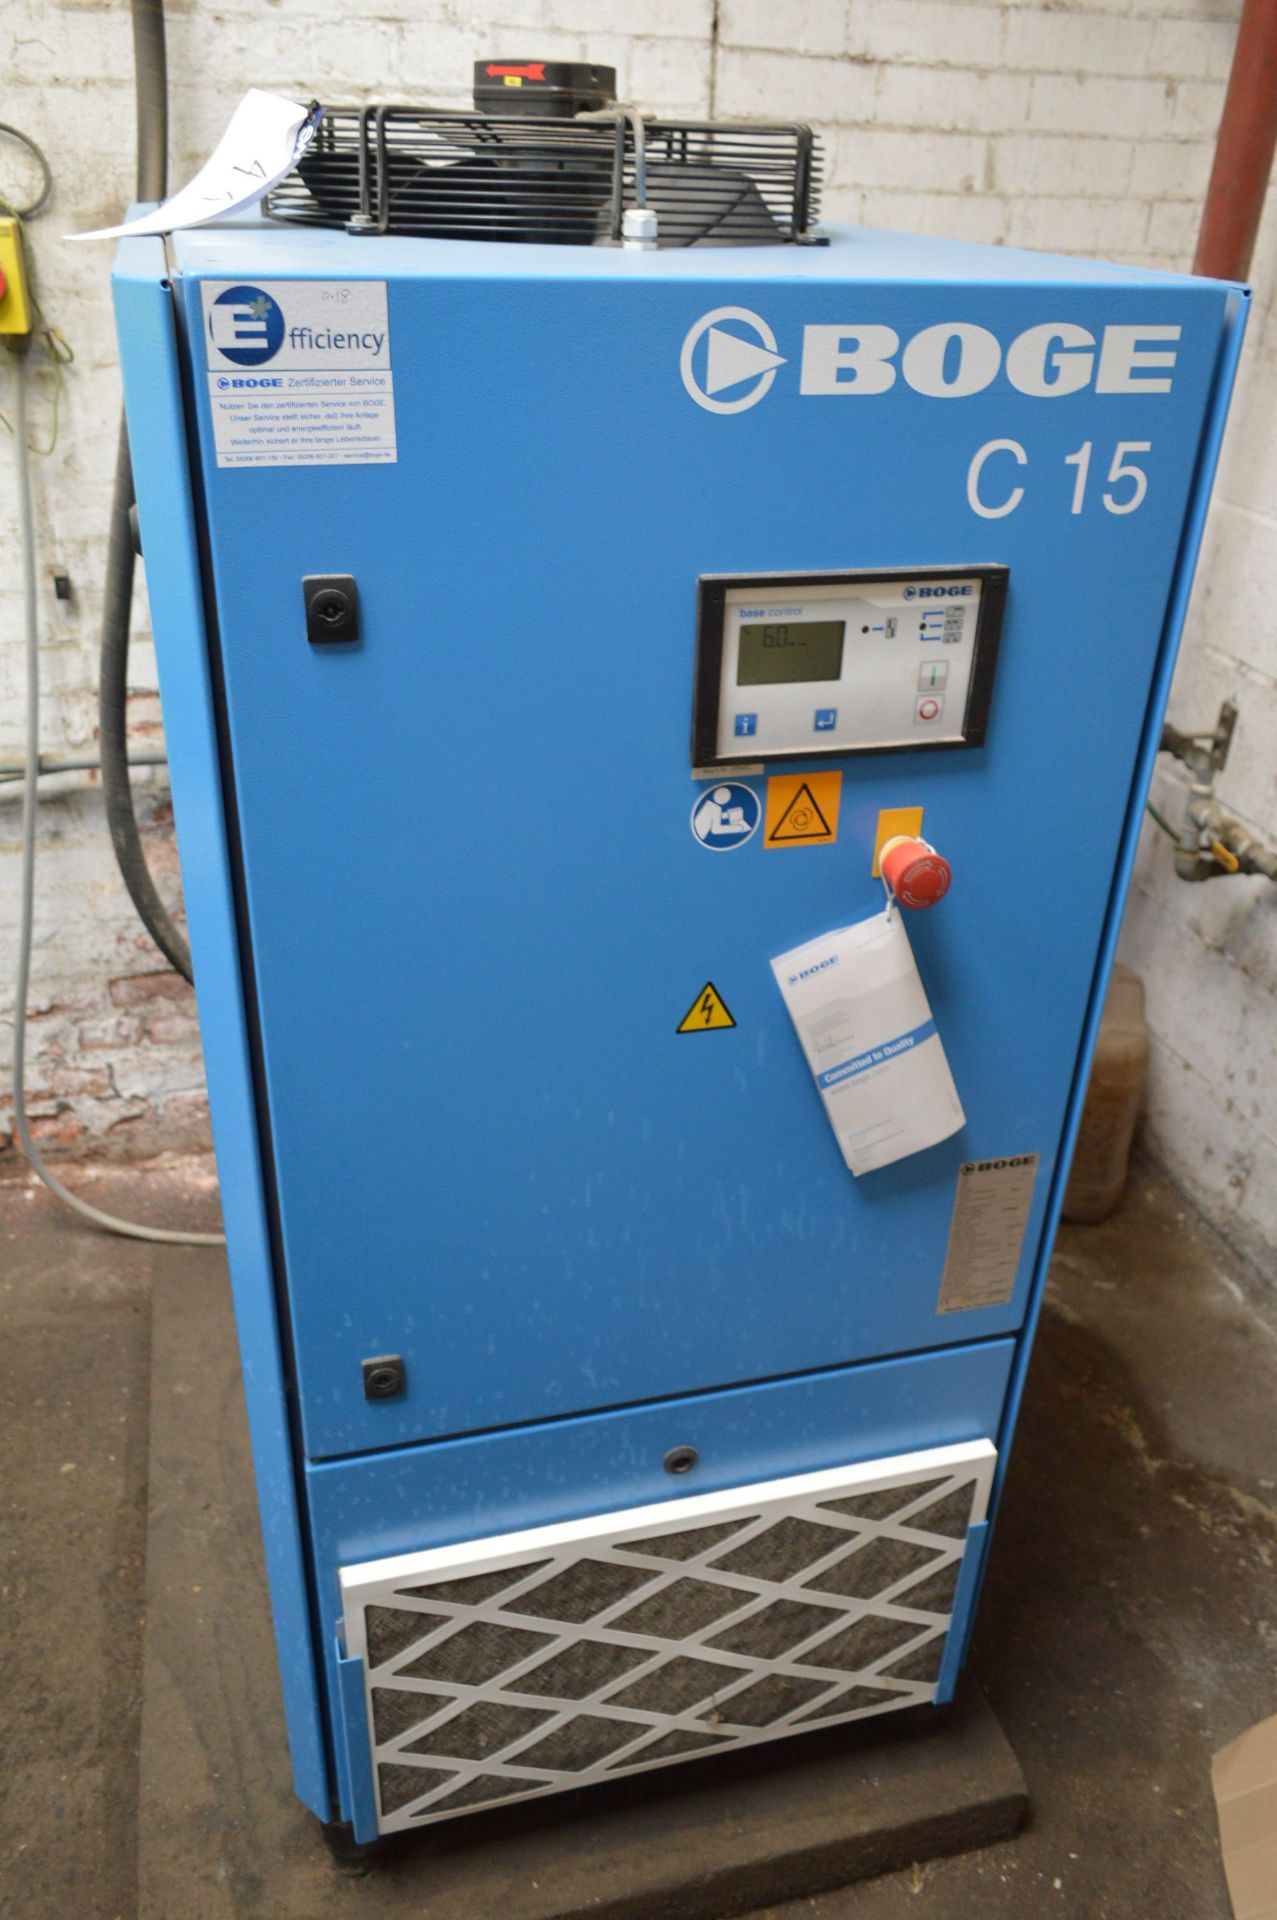 Boge C15 PACKAGED AIR COMPRESSOR, serial no. 5108452, year of manufacture 2017, 4499 hours (at - Bild 2 aus 4